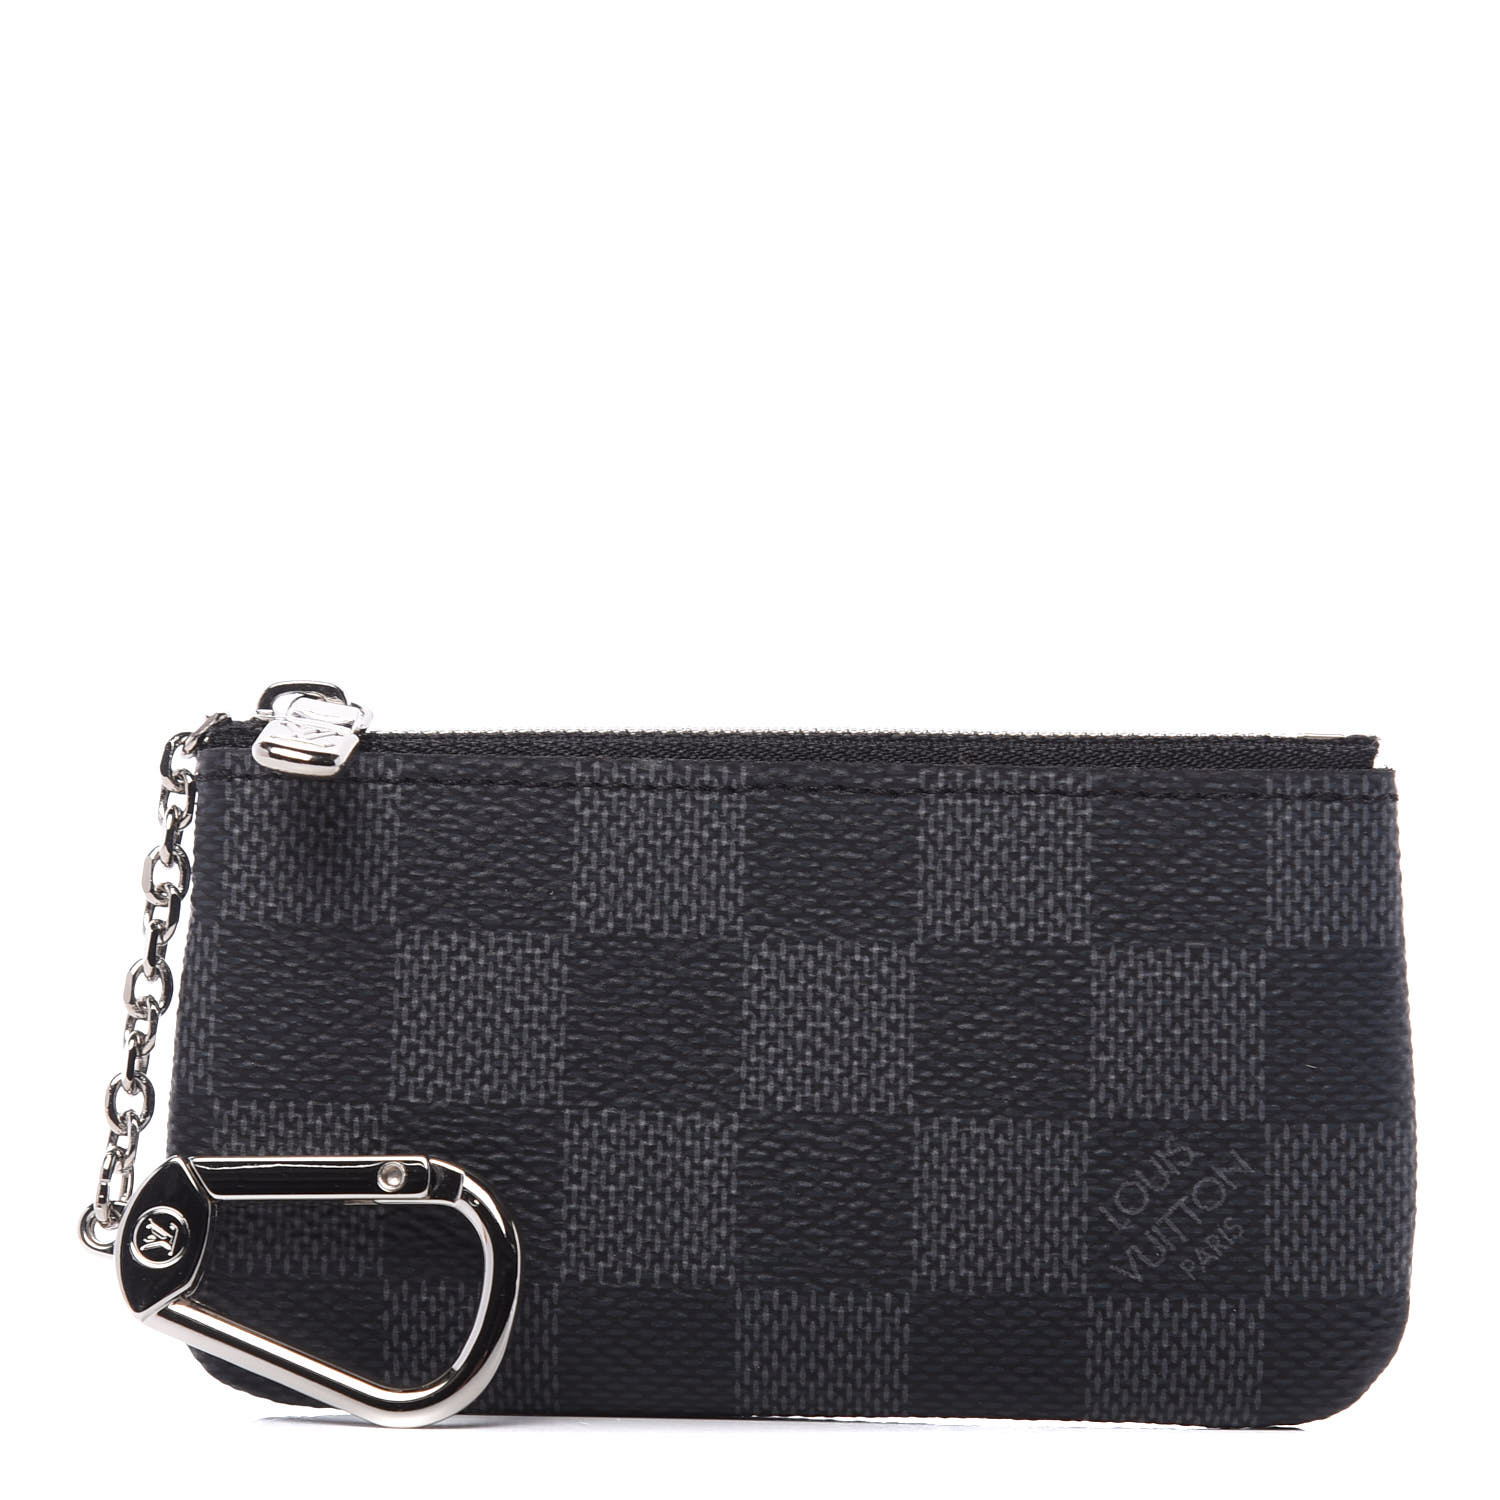 LOUIS VUITTON KEY POUCH IN DAMIER GRAPHITE - WHAT FITS INSIDE 